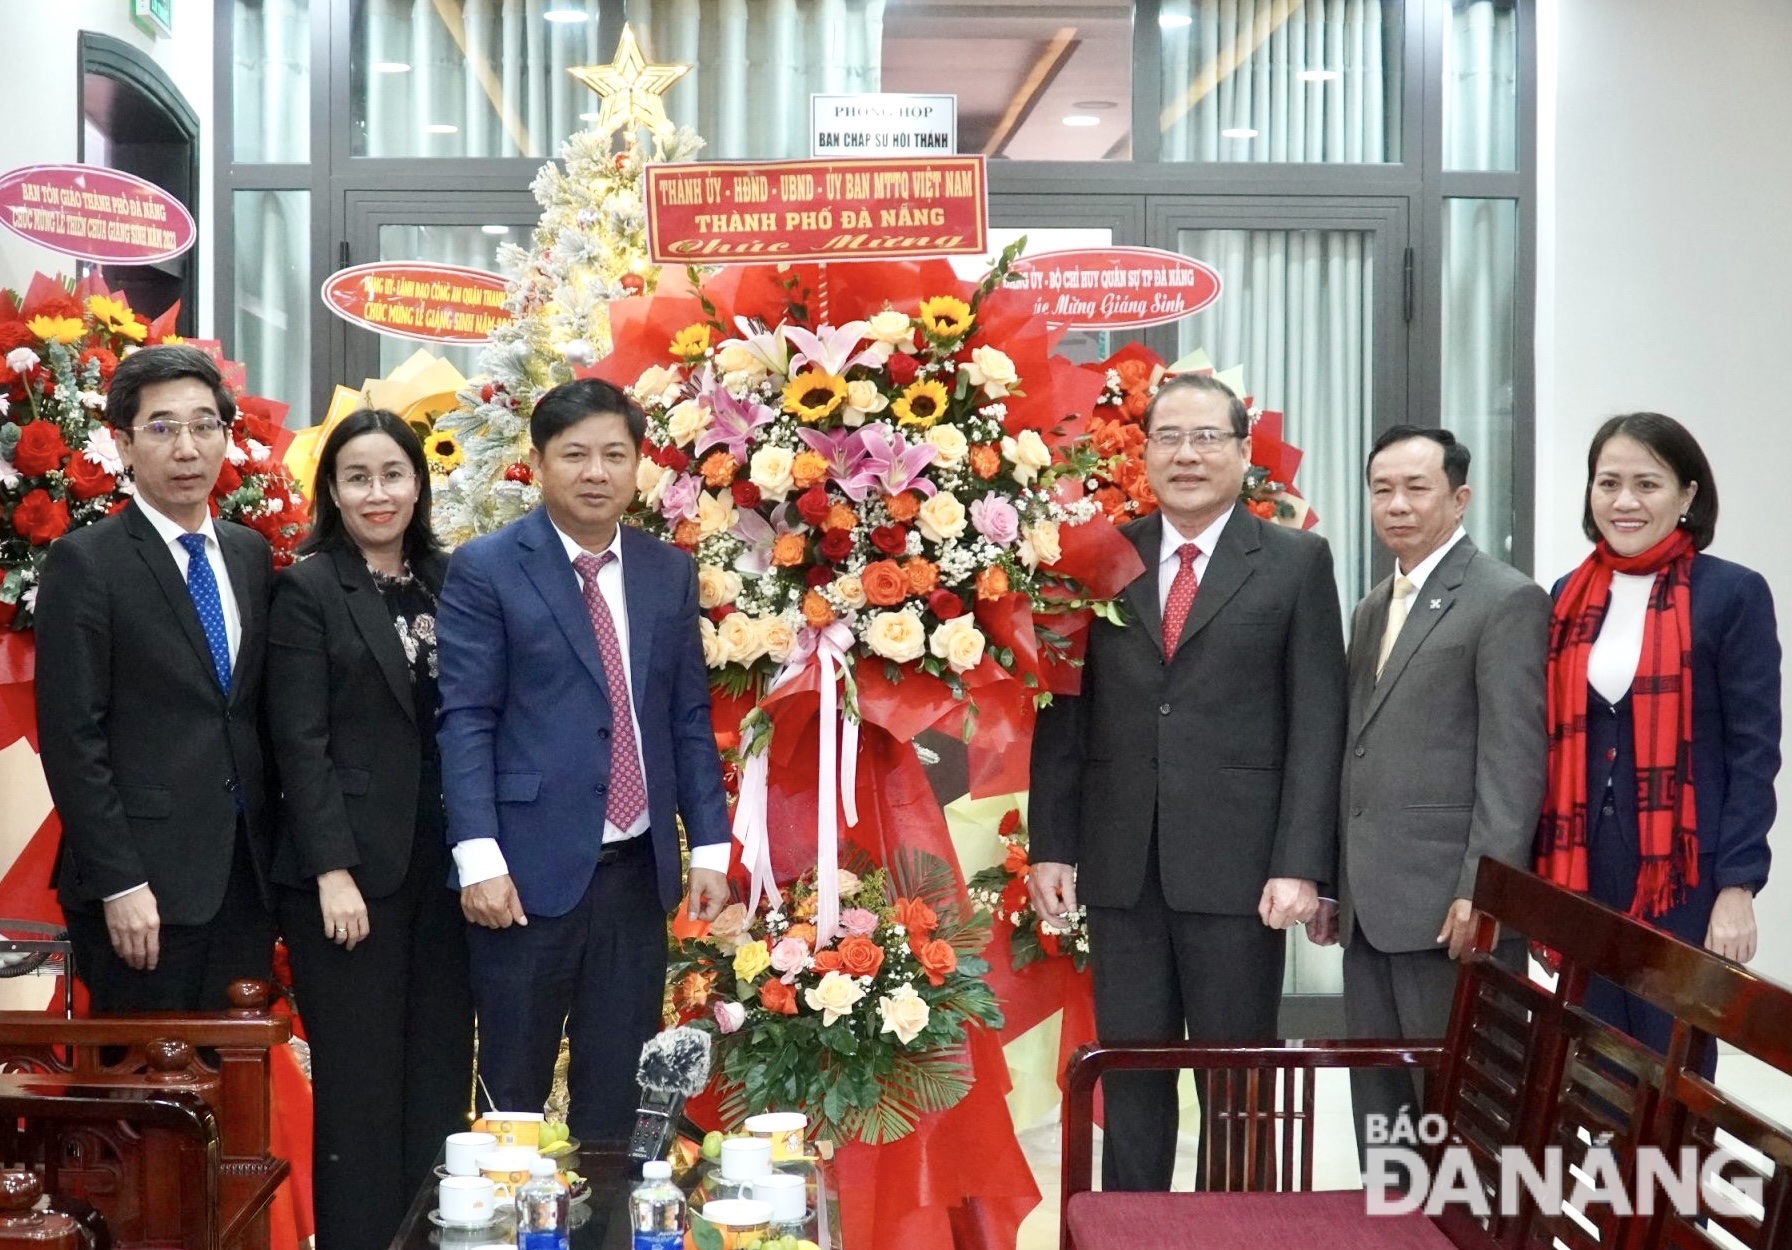 Deputy Secretary of the Da Nang Party Committee Luong Nguyen Minh Triet (3rd, left) and city leaders giving flowers to congratulate the Representative Board of the Evangelical Church of Viet Nam (South). Photo: N.QUANG